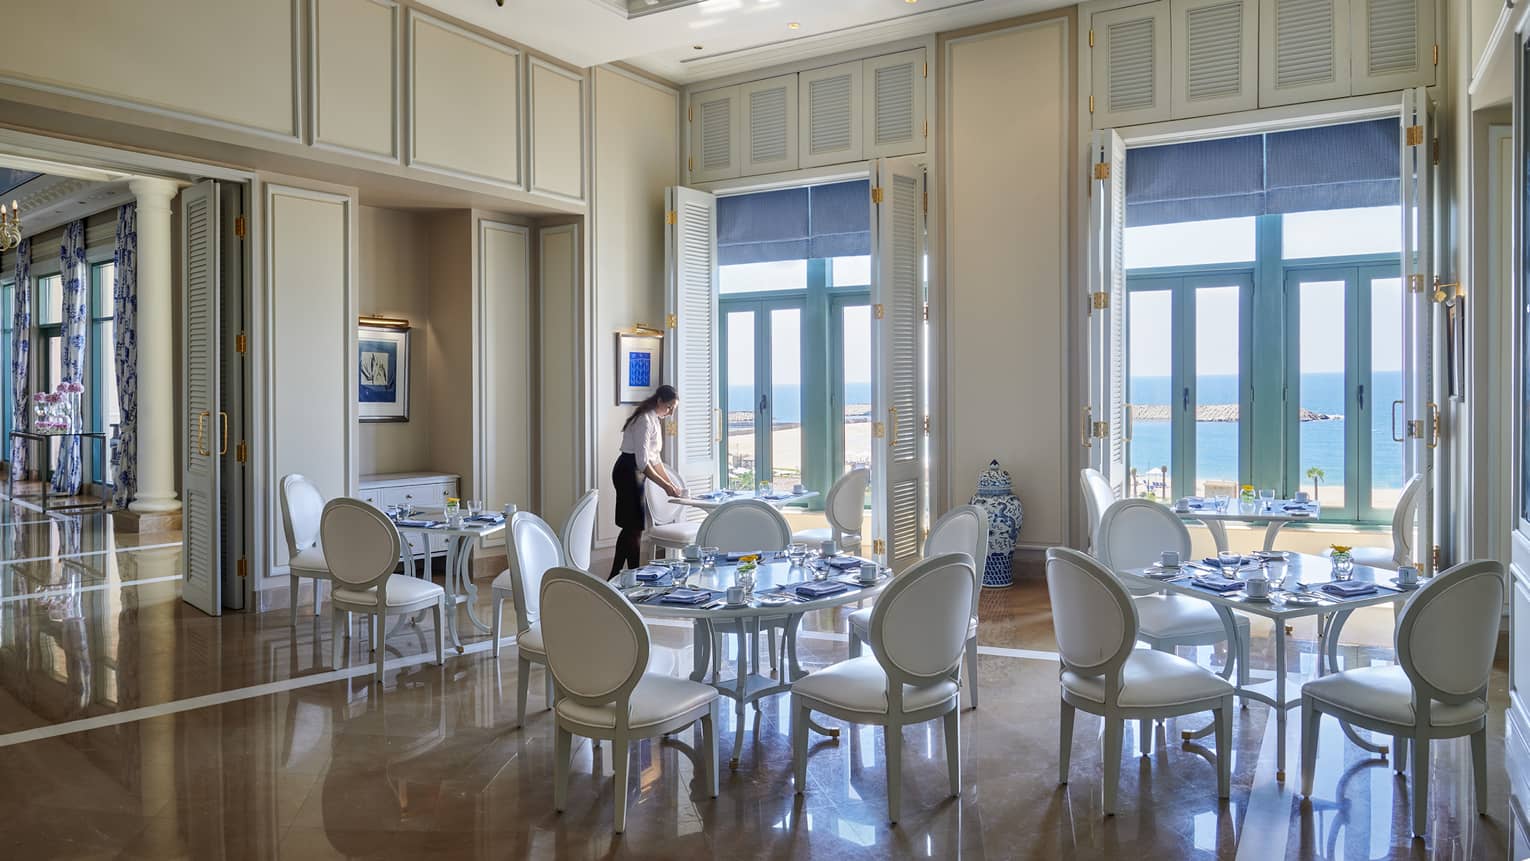 Server sets white table at Kala restaurant, white shutters with blue blinds lead to ocean views 